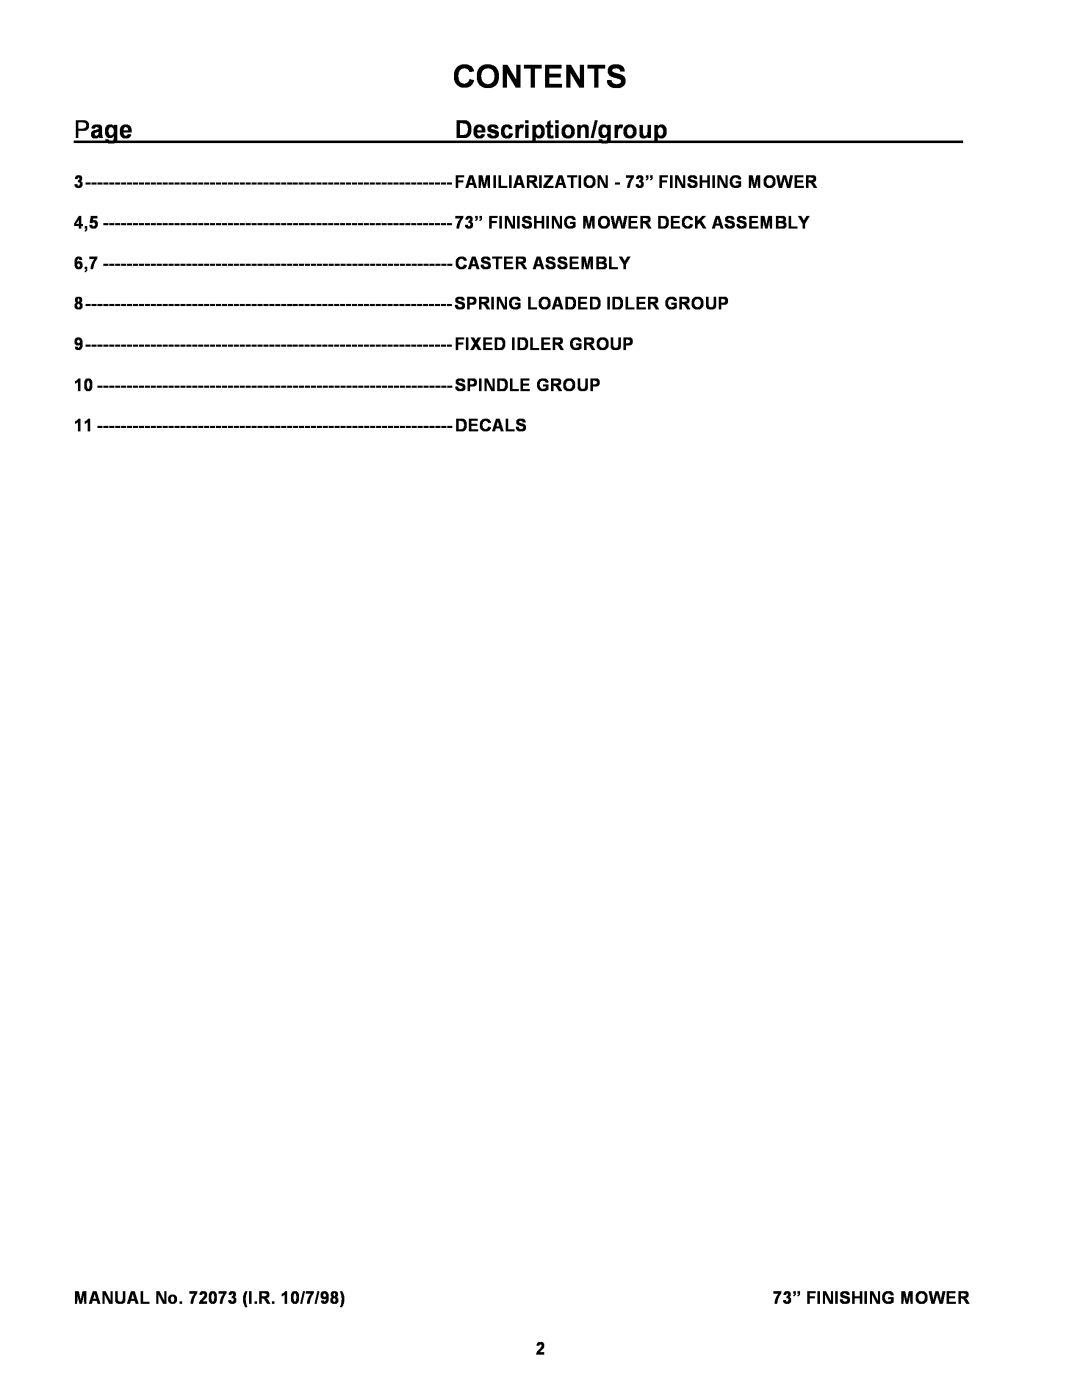 Snapper Finishing Mower manual Contents, Page, Description/group 